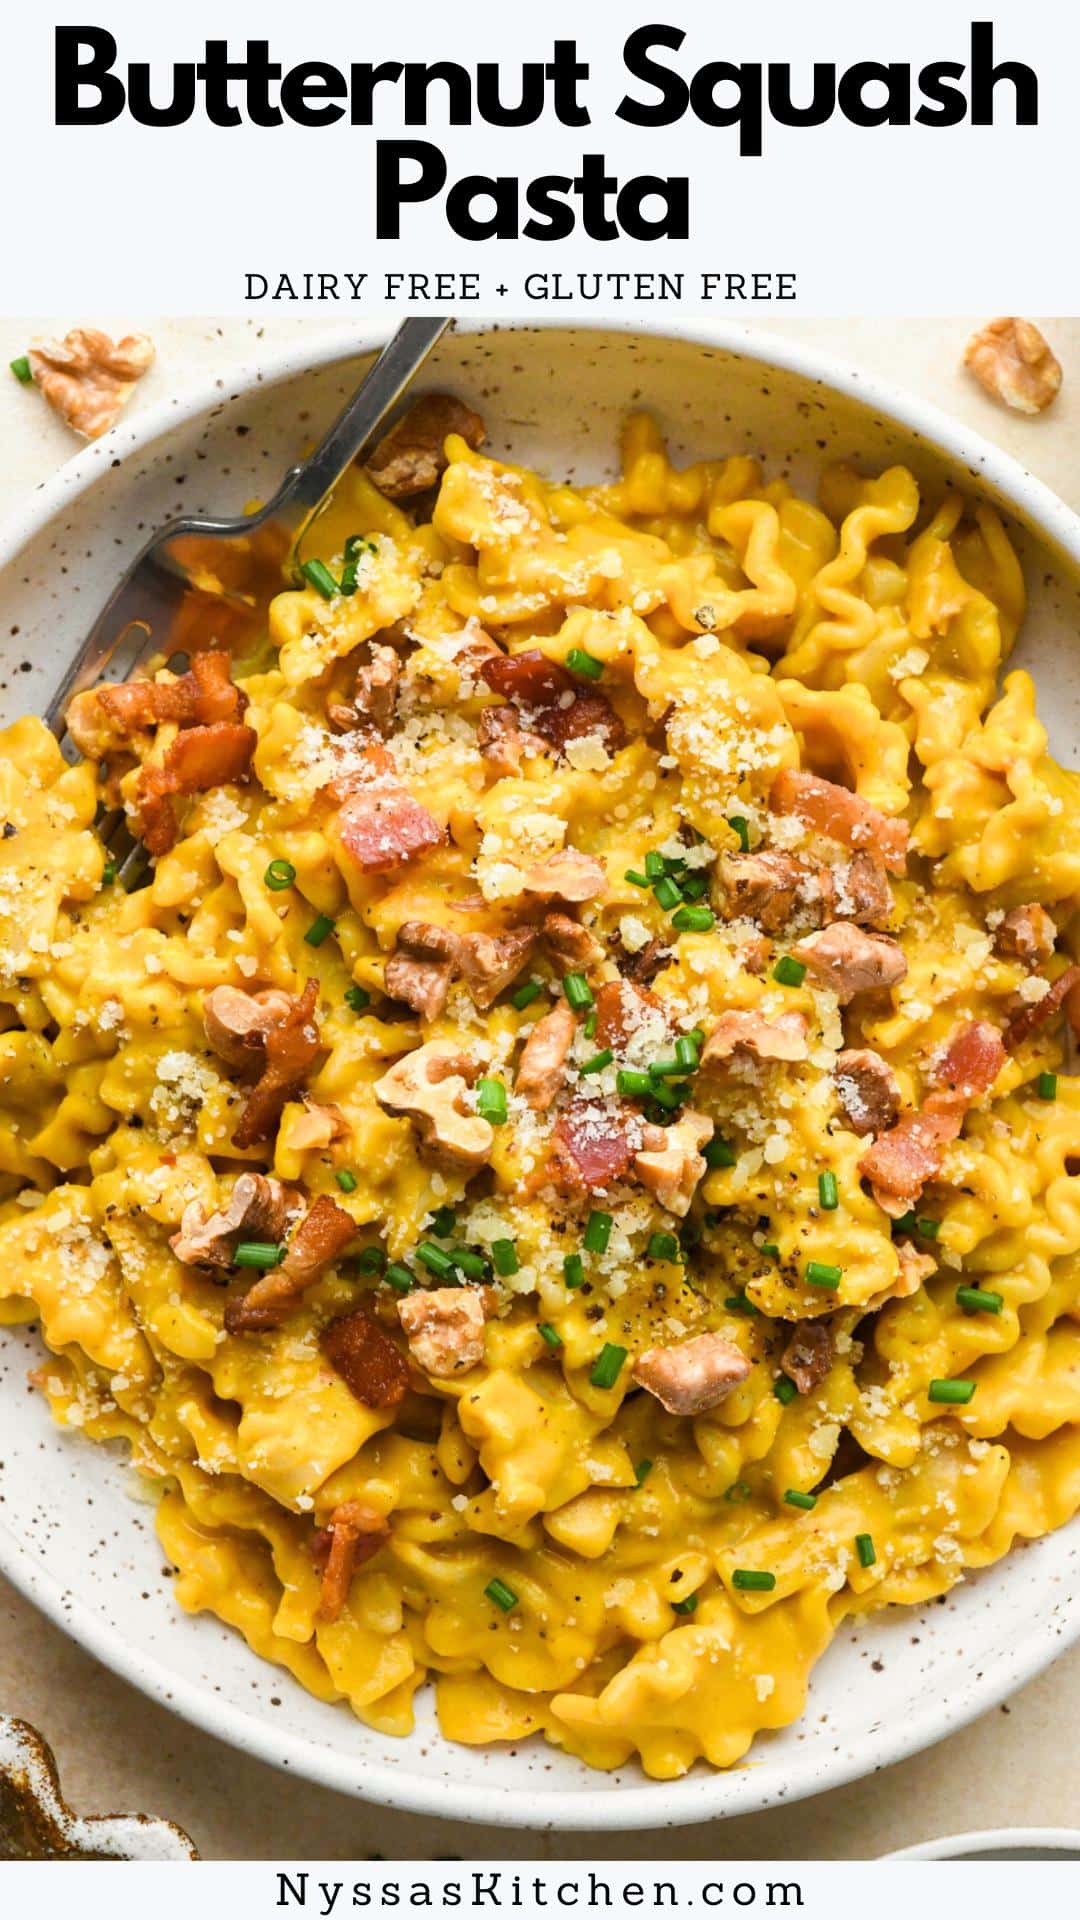 If you love a cozy dairy free pasta recipe than this butternut squash pasta is for you! Made without heavy cream, swapping in ultra creamy cashew cream instead. It is easy to make, healthy, and a total crowd pleaser. Easily made vegan and vegetarian by leaving out the bacon and using olive oil instead!